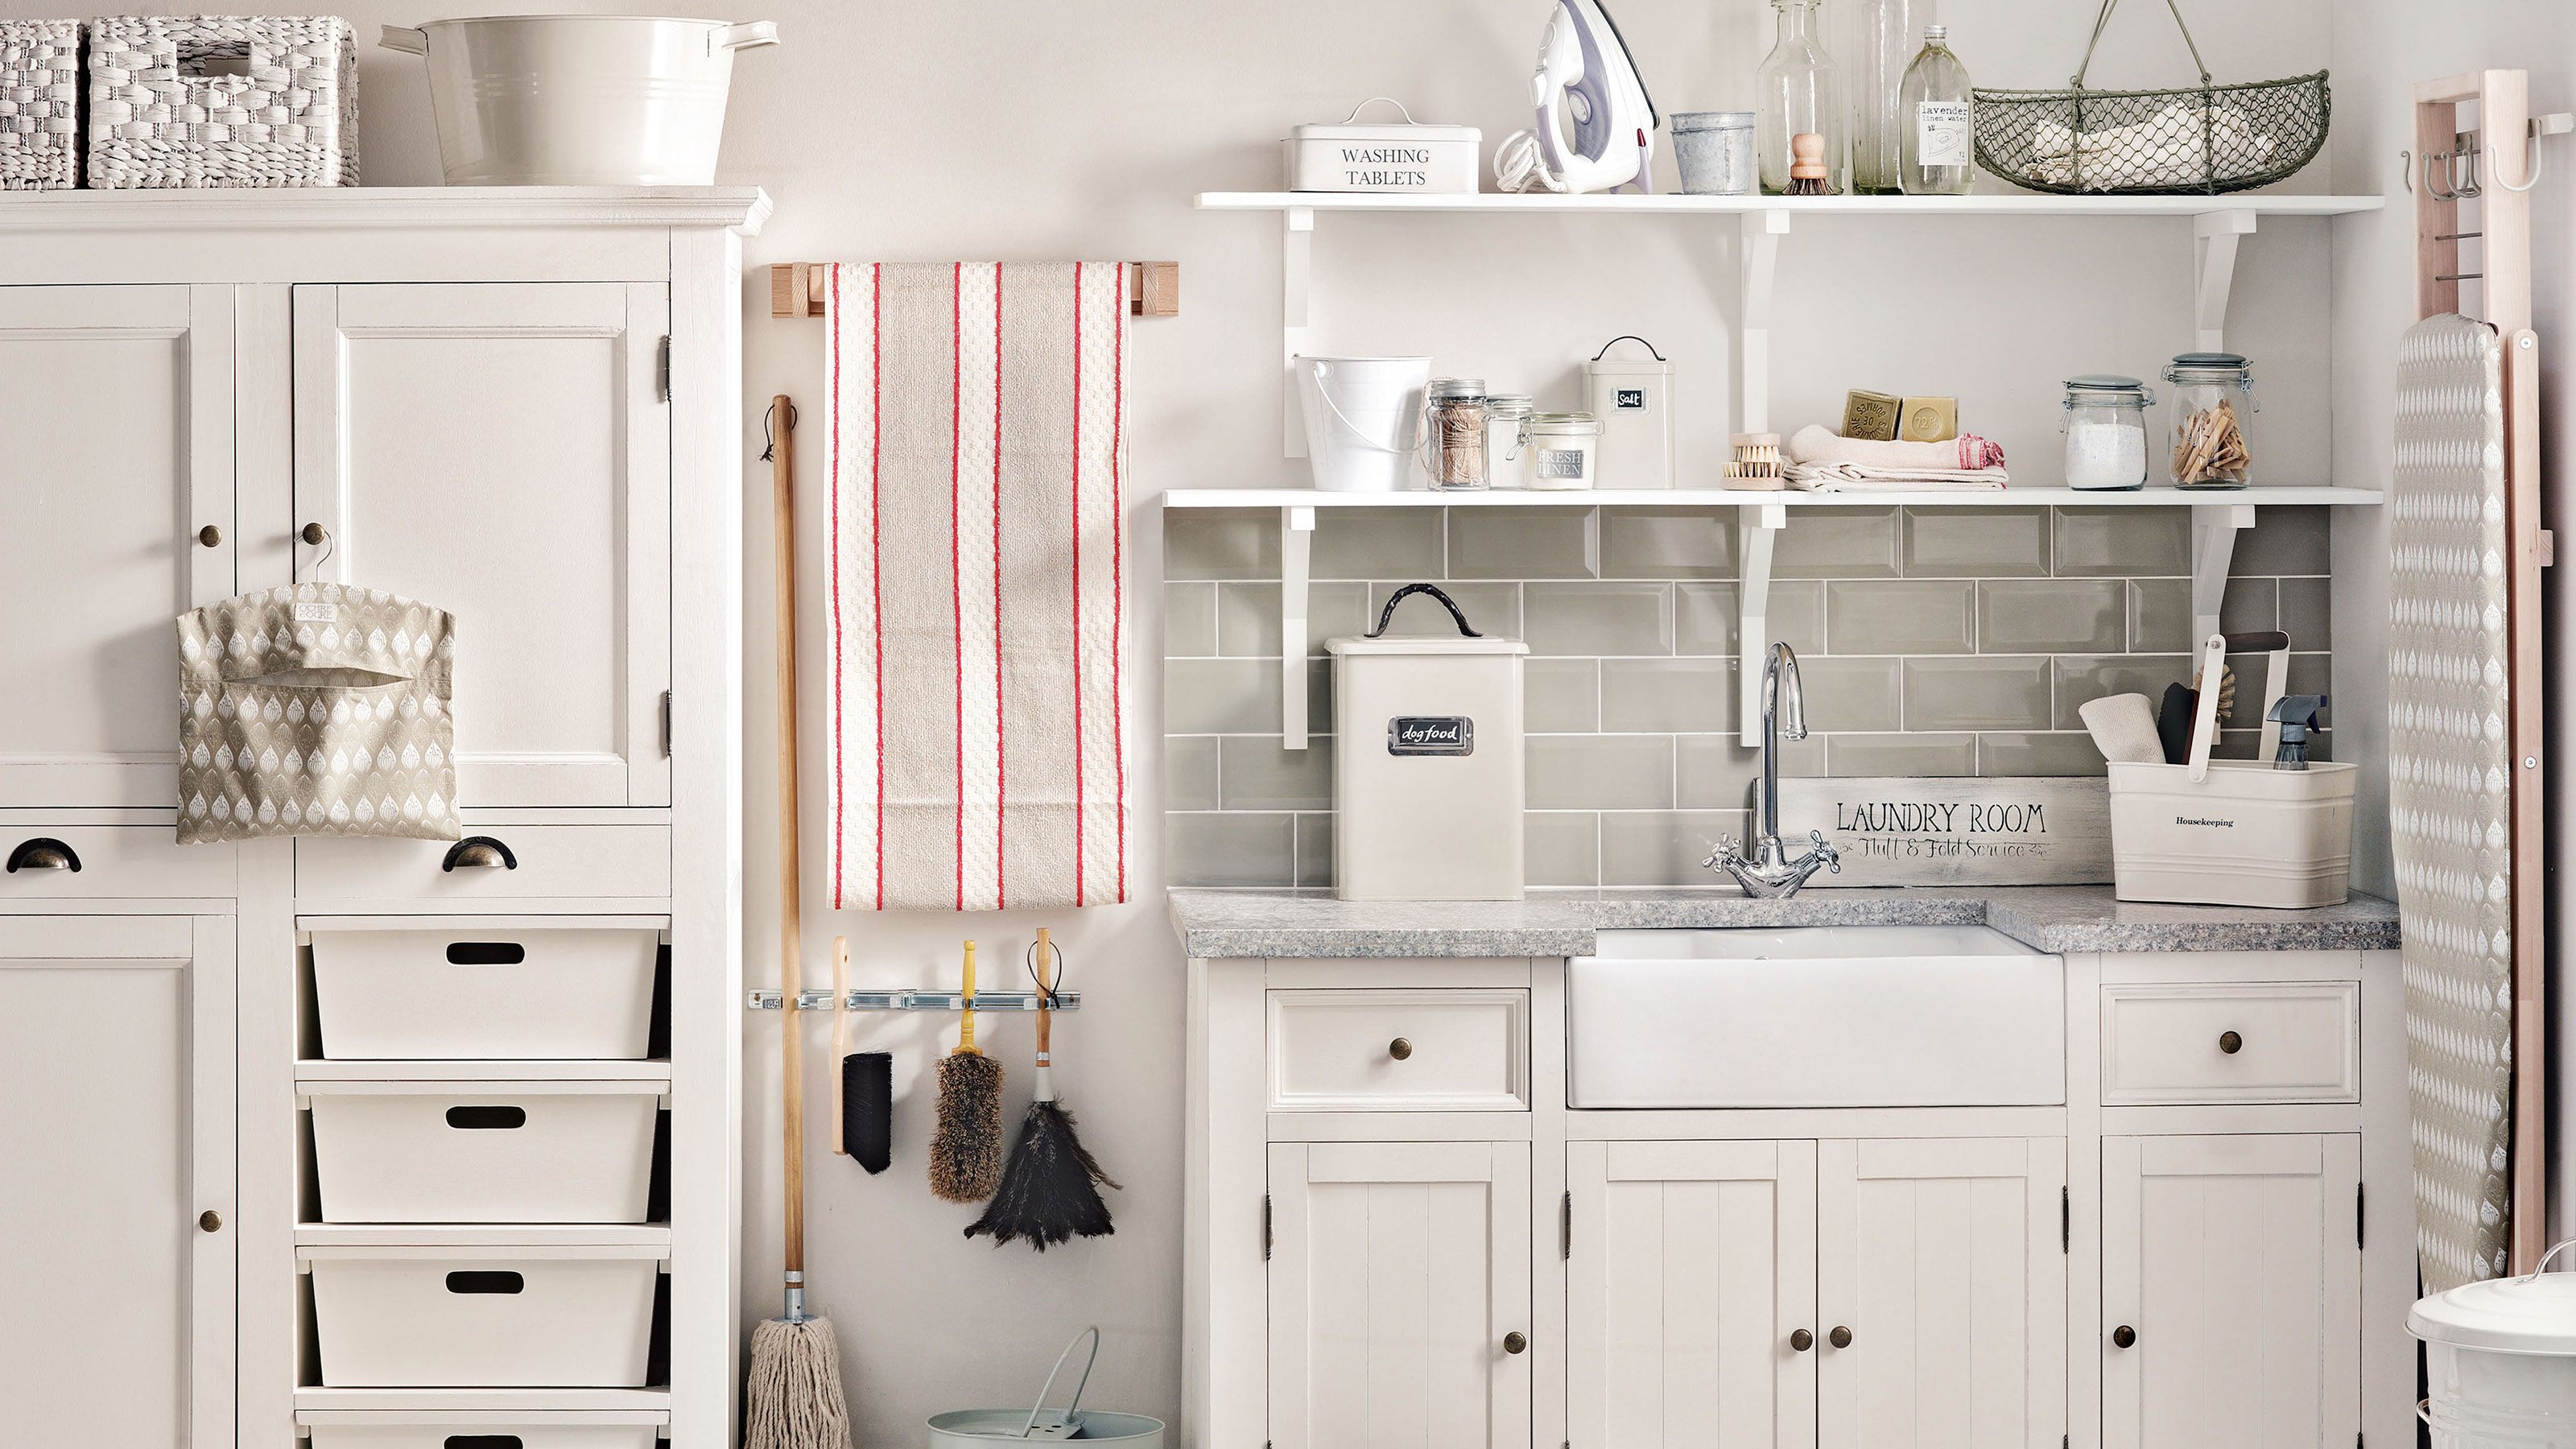 23 Utility Room Storage Ideas To Keep A Curb On The Clutter And Create ...